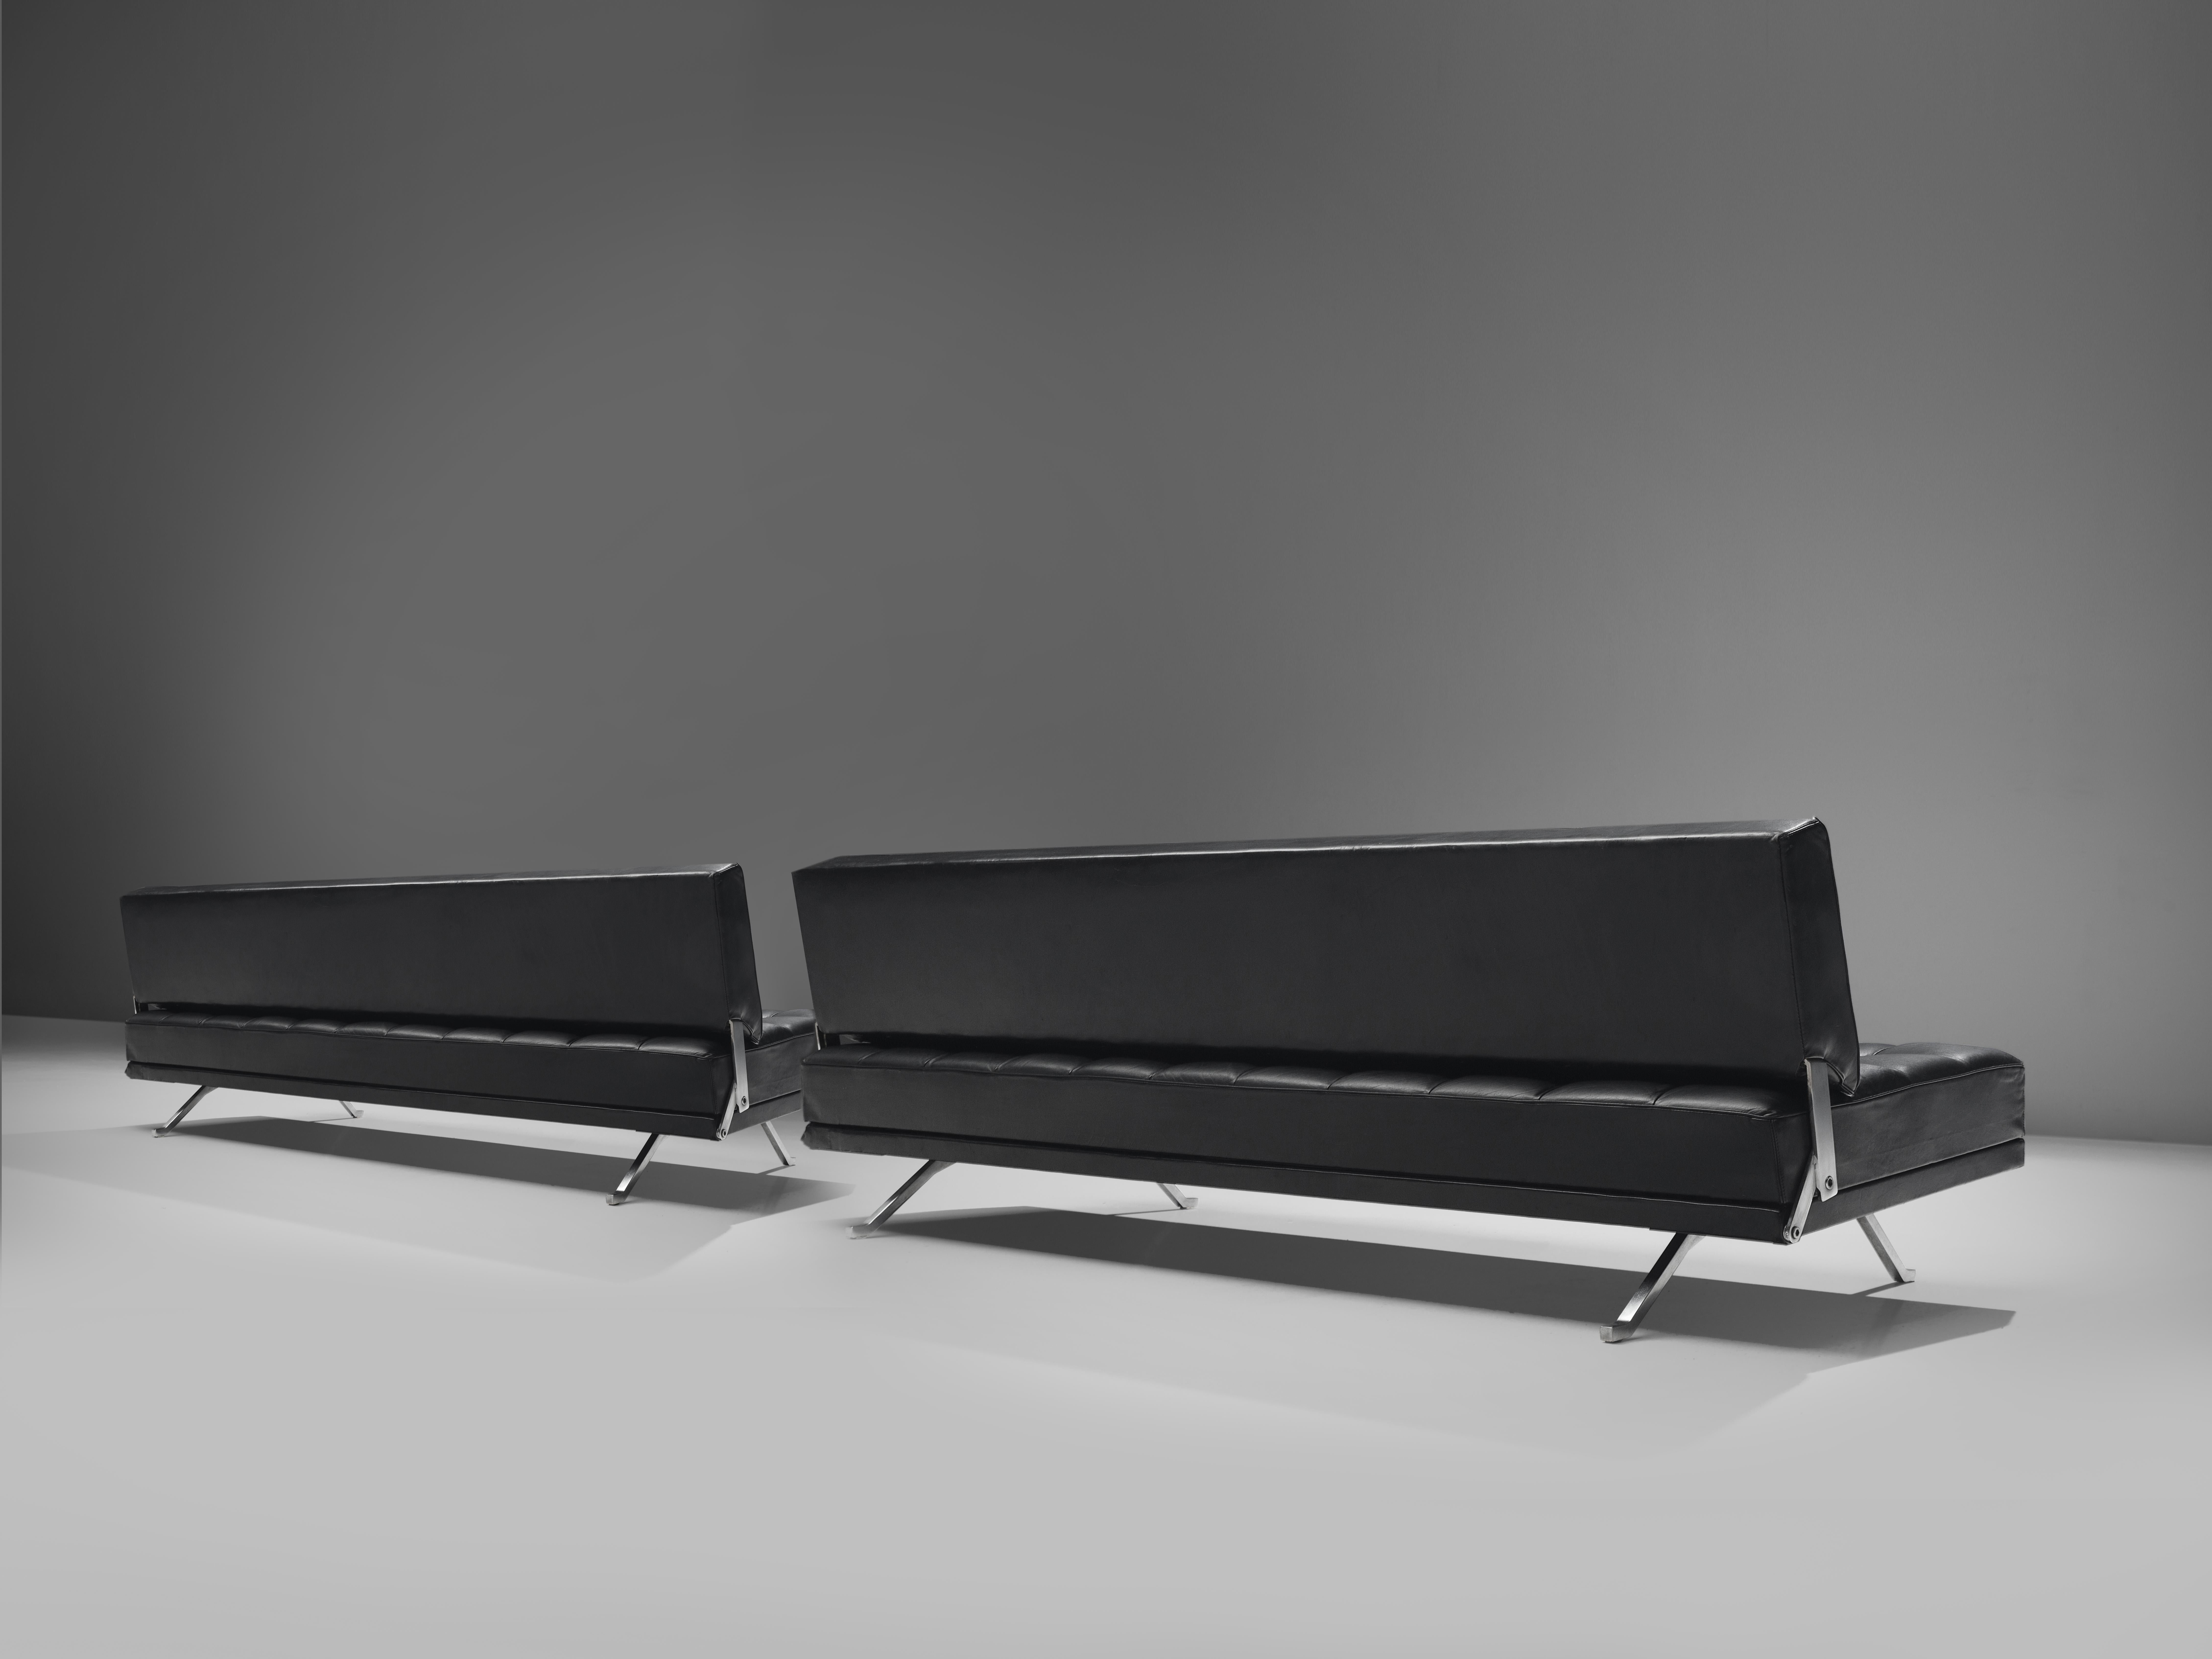 Johannes Spalt for Wittmann, 'Constanze' daybed or sofa, black leather, steel, Austria, 1960s
 
This Austrian daybed named ‘Constanze’ is typical for Mid-Century Modern design from Austria. The tufted leather seat and back is constructed with a